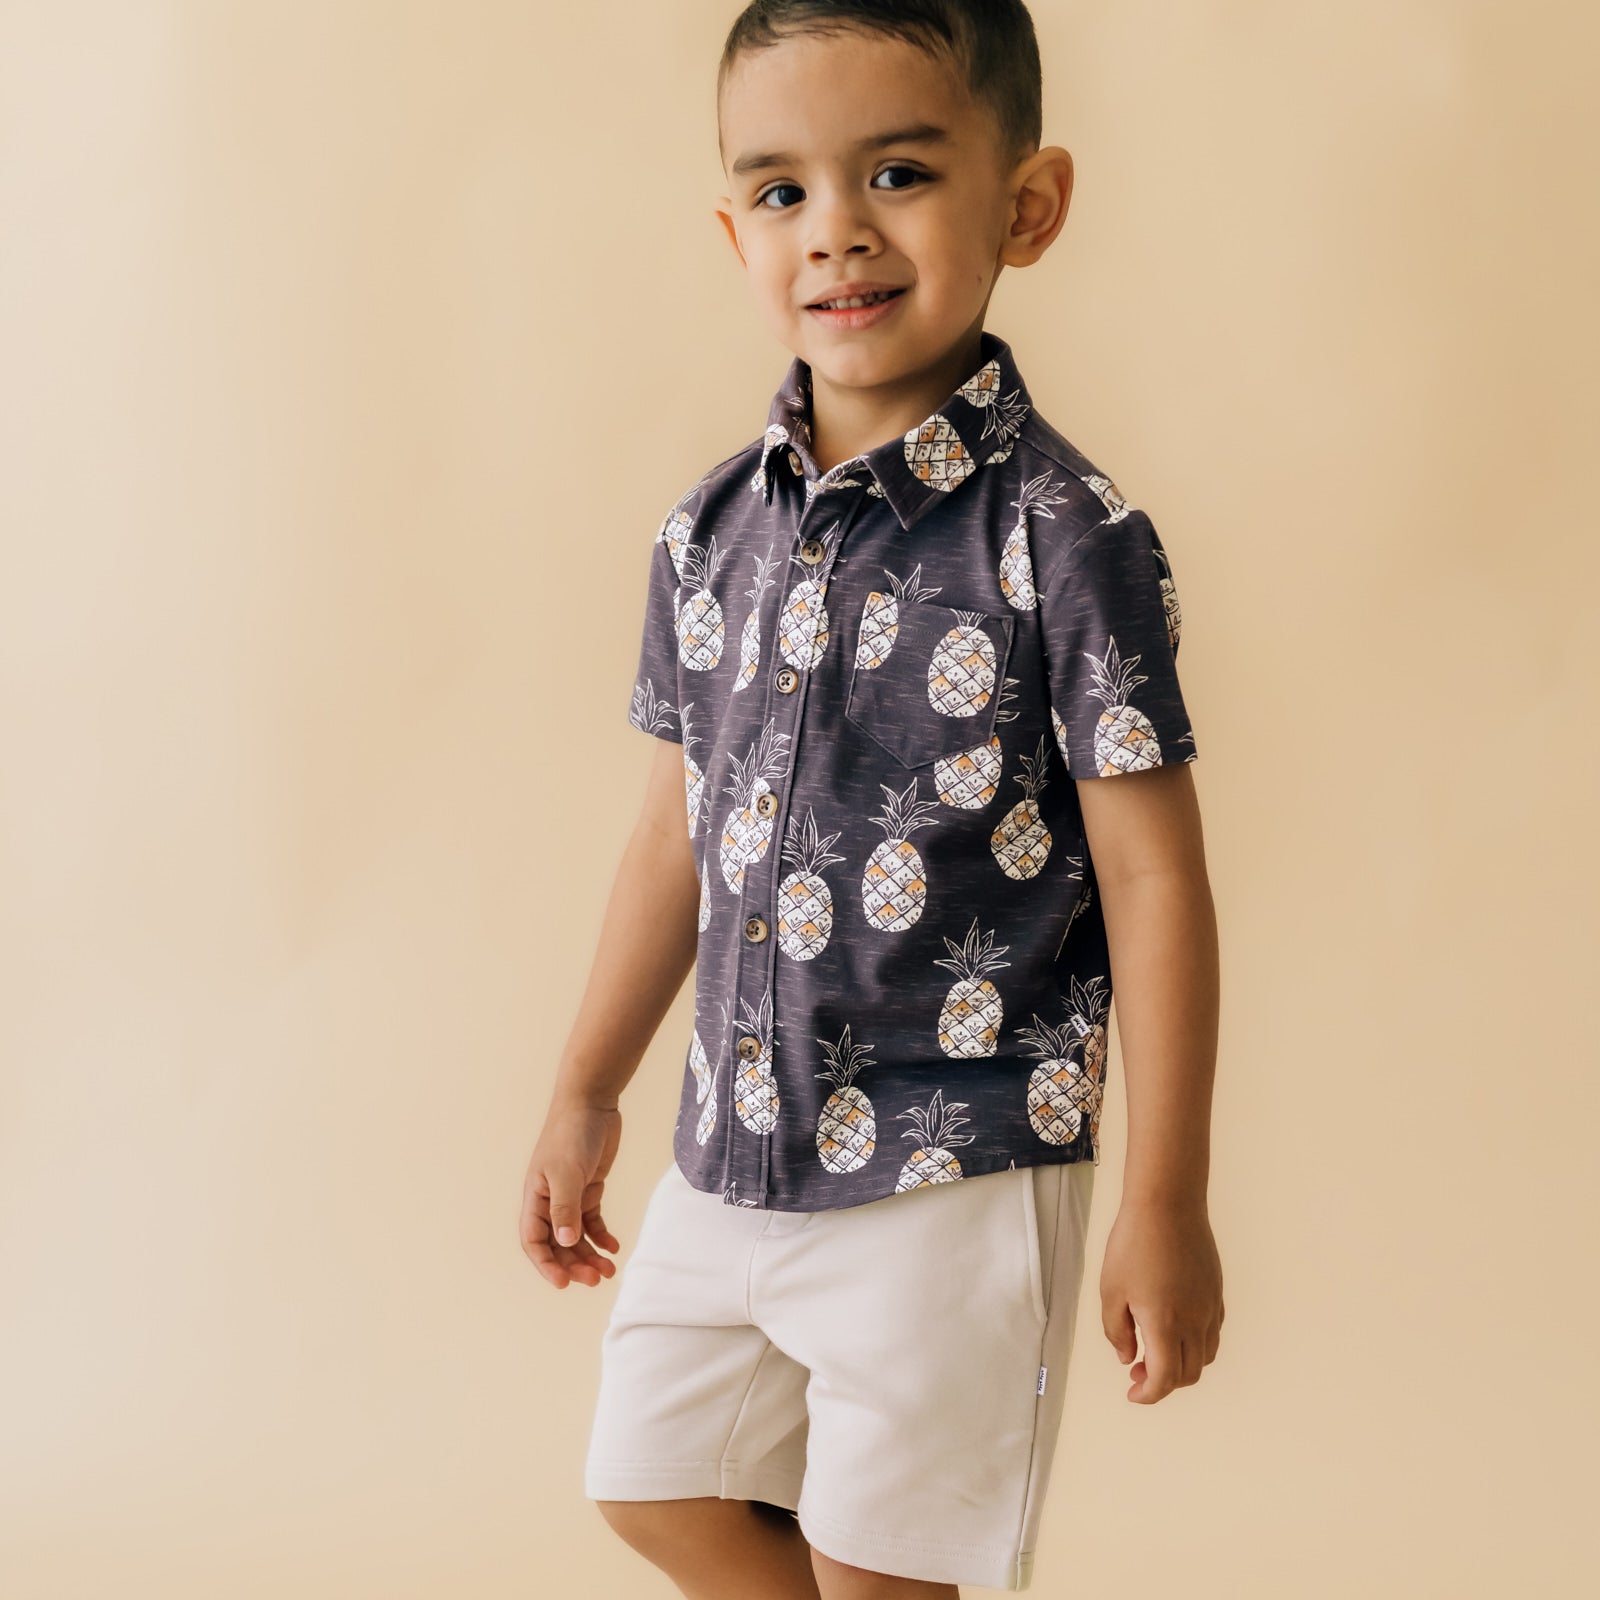 Child wearing Bone Drawstring Shorts paired with a Sweet Paradise button down shirt